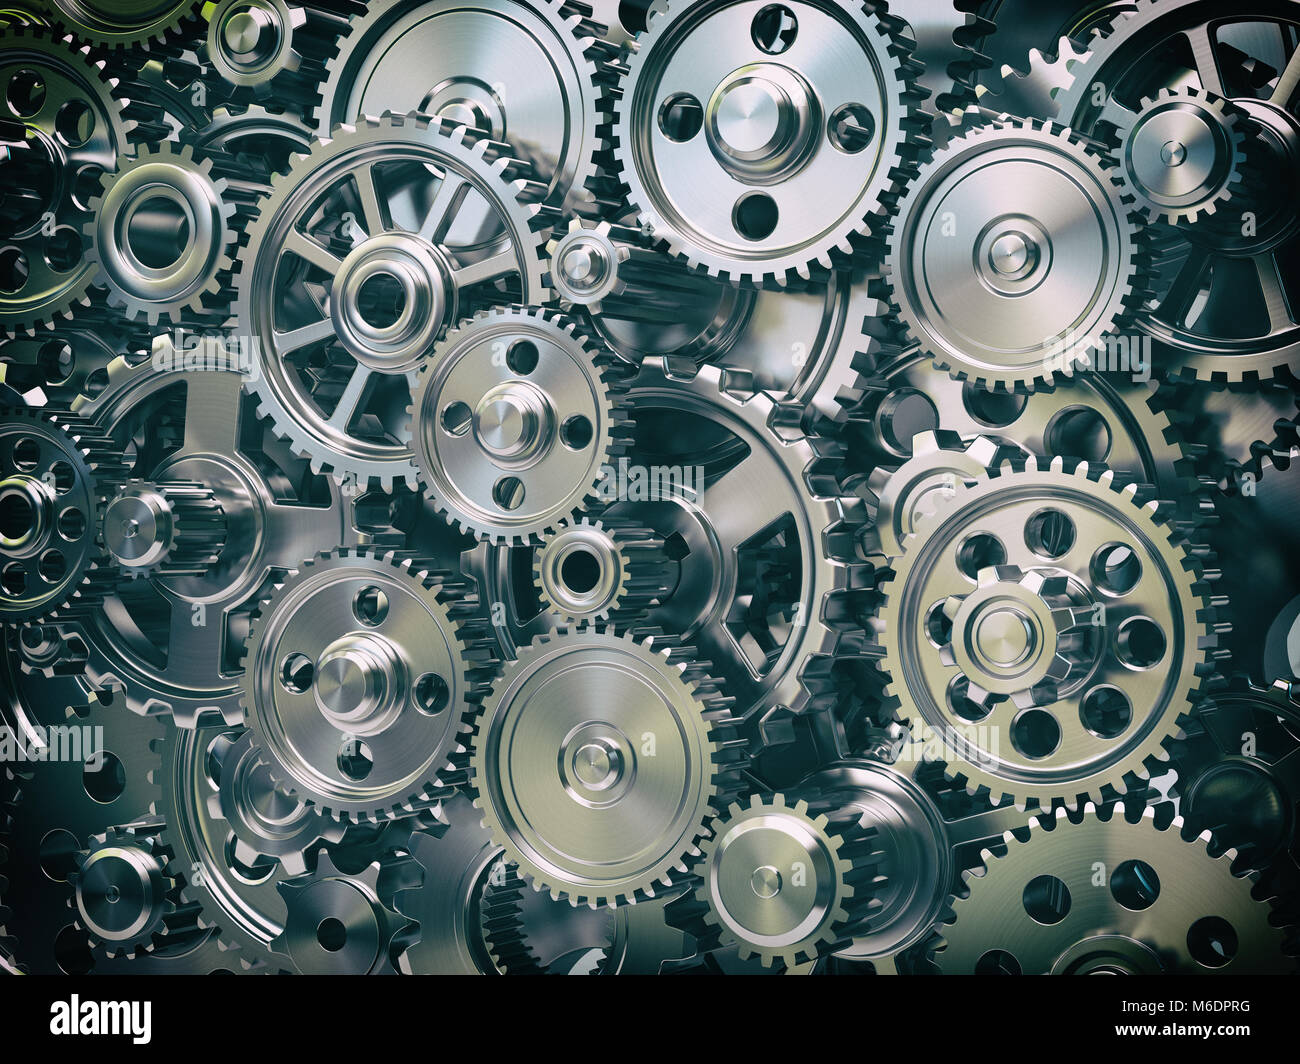 Engine gear wheels. Industrial and teamwork concept background. 3d illustration Stock Photo